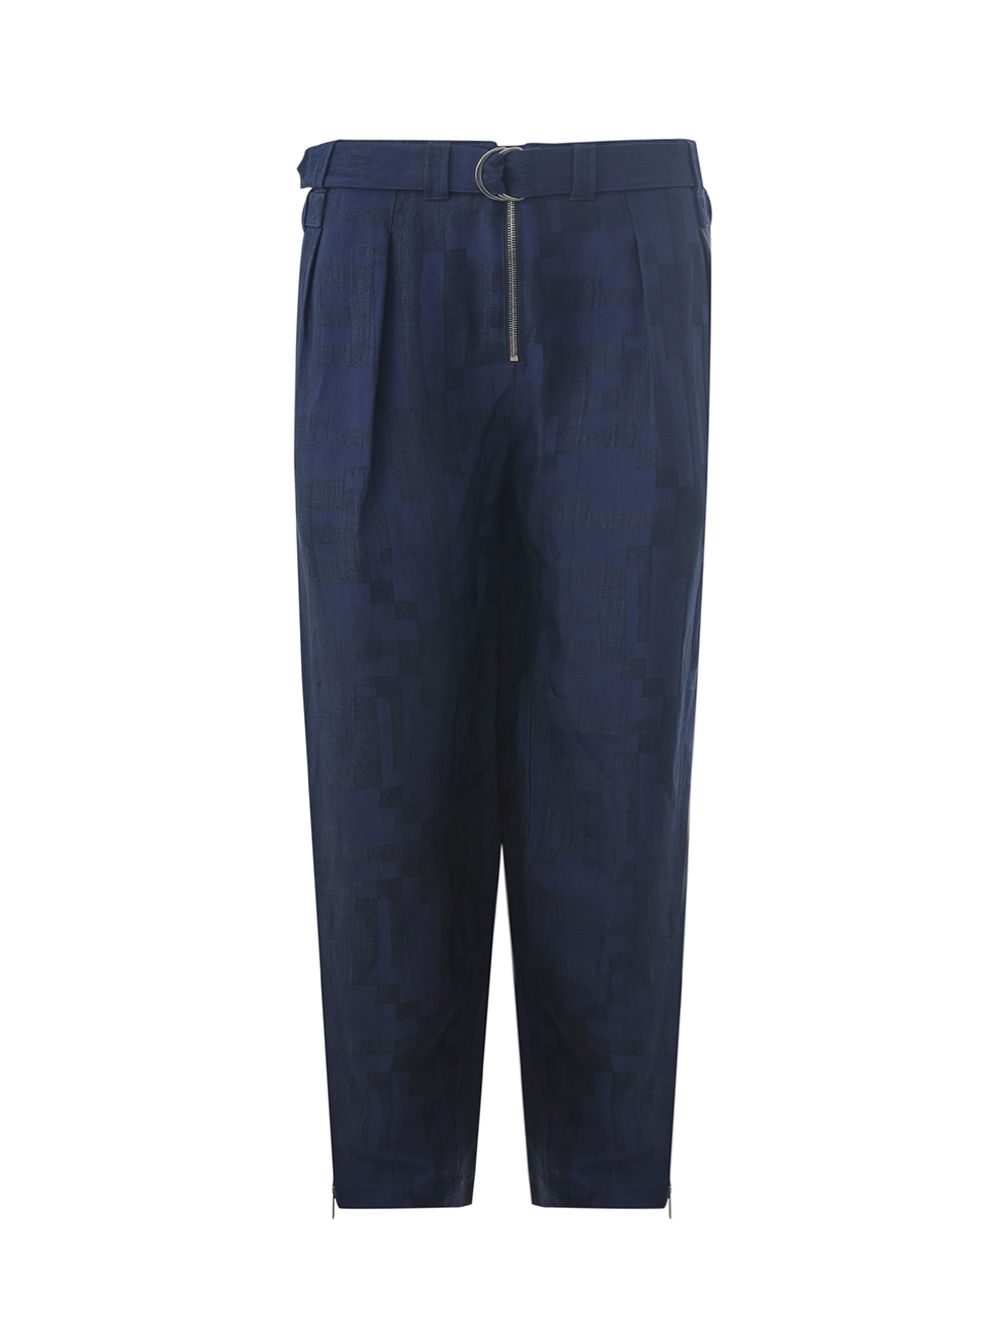 Emporio Armani Relaxed Fit Linen Trousers with Belt